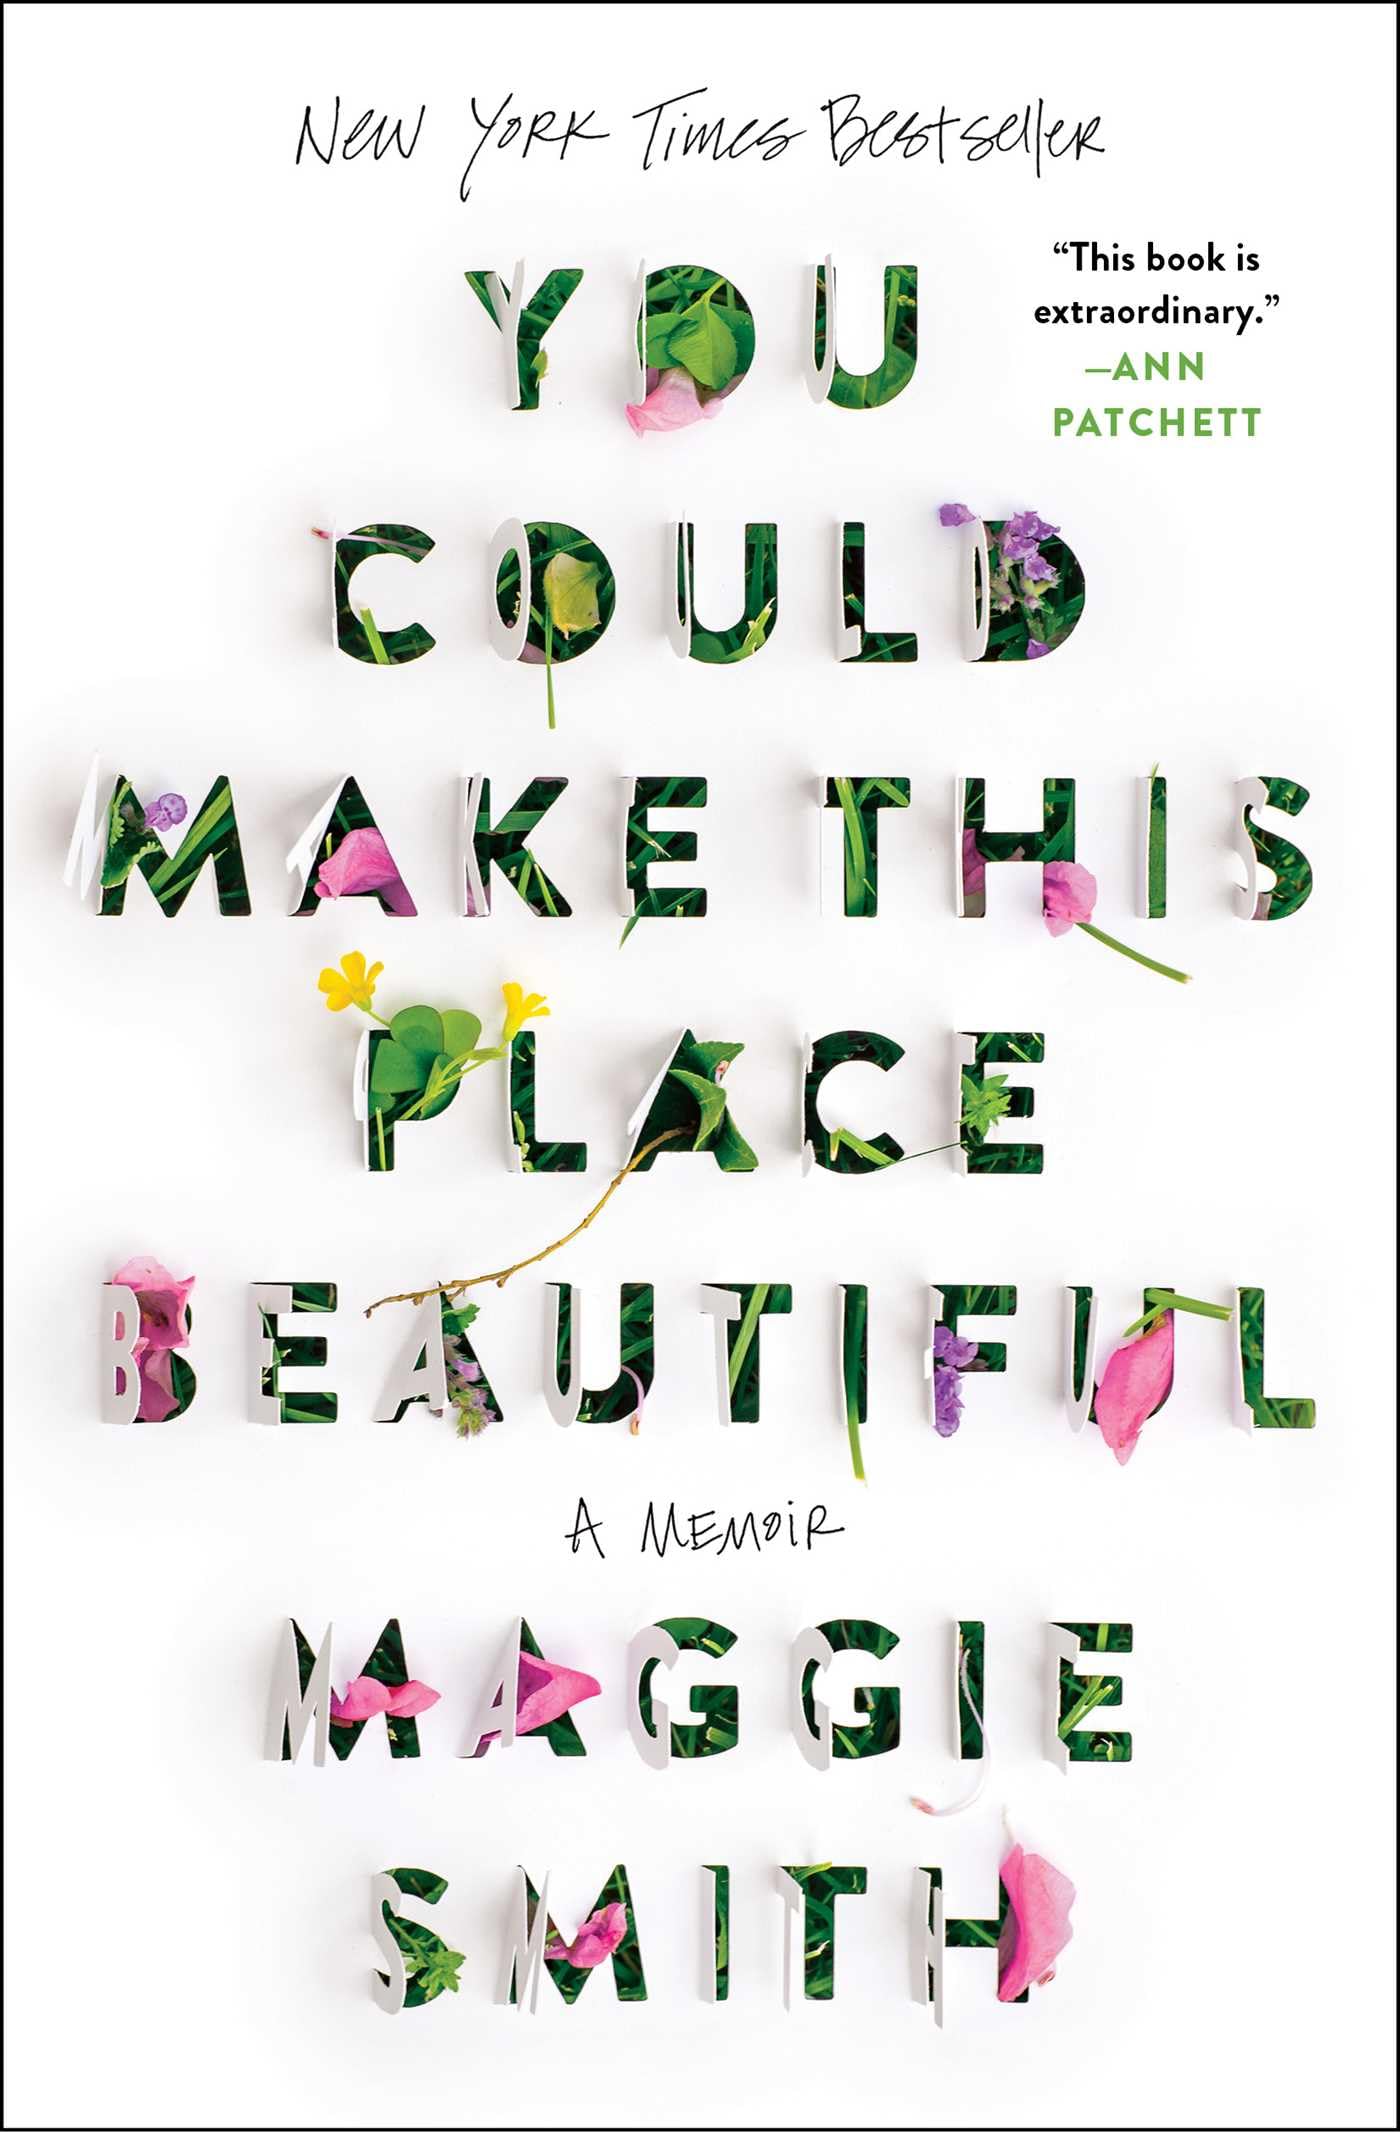 You Could Make This Place Beautiful: A Memoir by Smith, Maggie